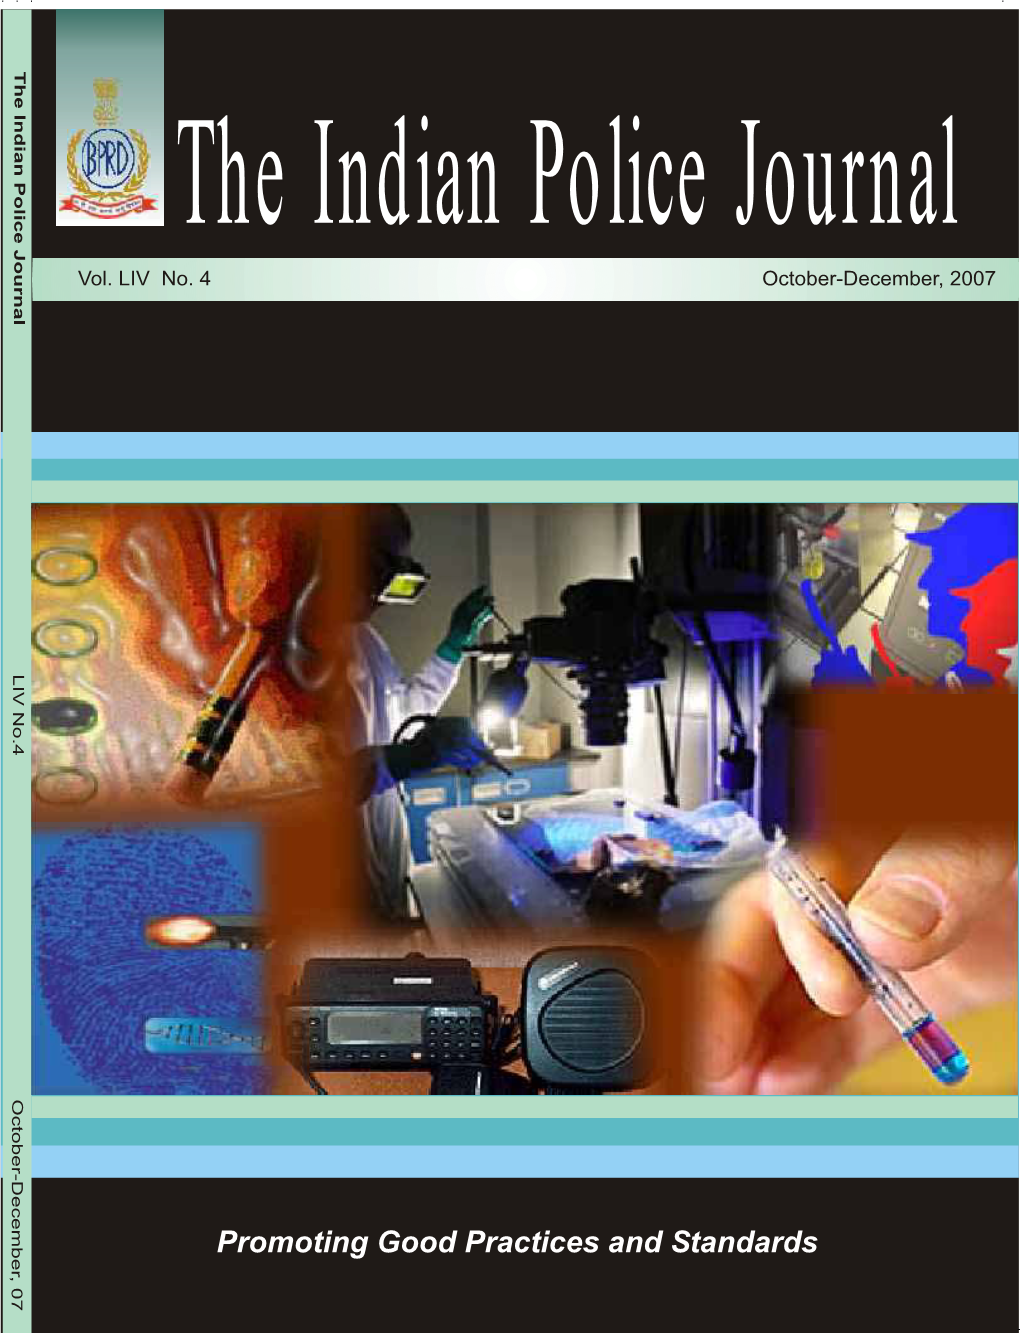 Promoting Good Practices and Standards ,7 R, 7 the Indian Police Journal CONTENTS Vol